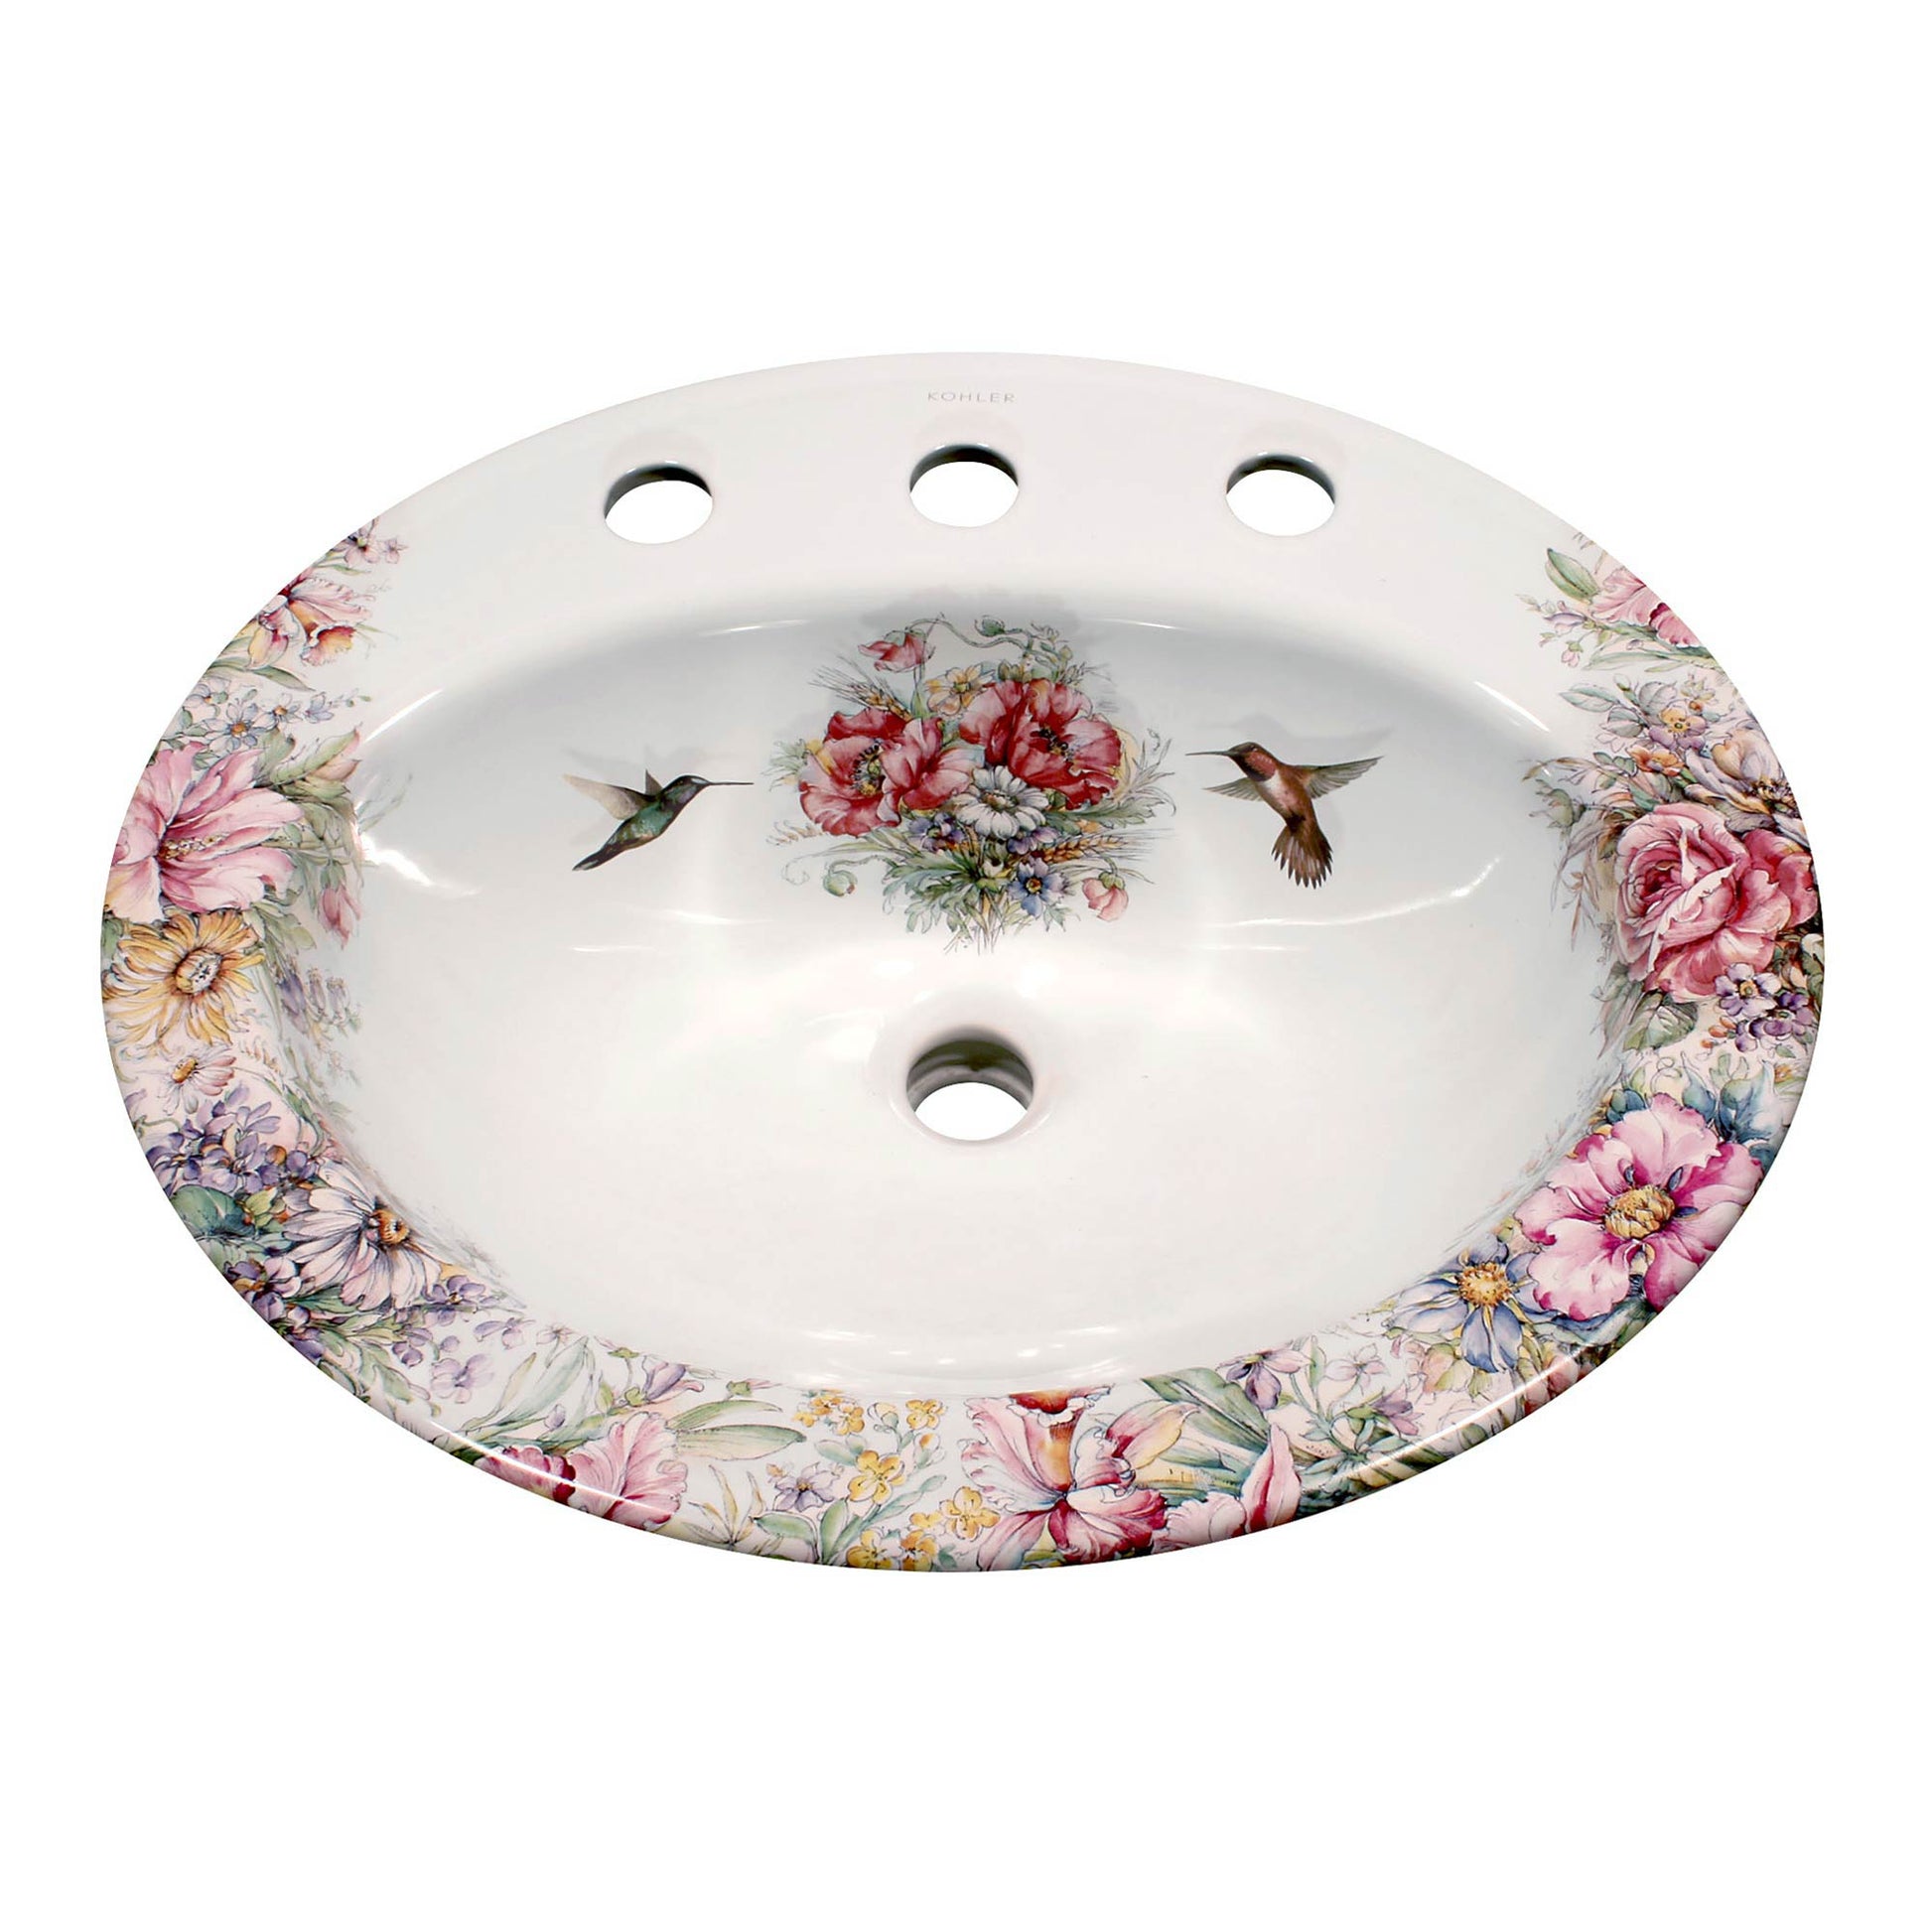 Rococo flowers roses orchids hummingbirds painted drop-in sink